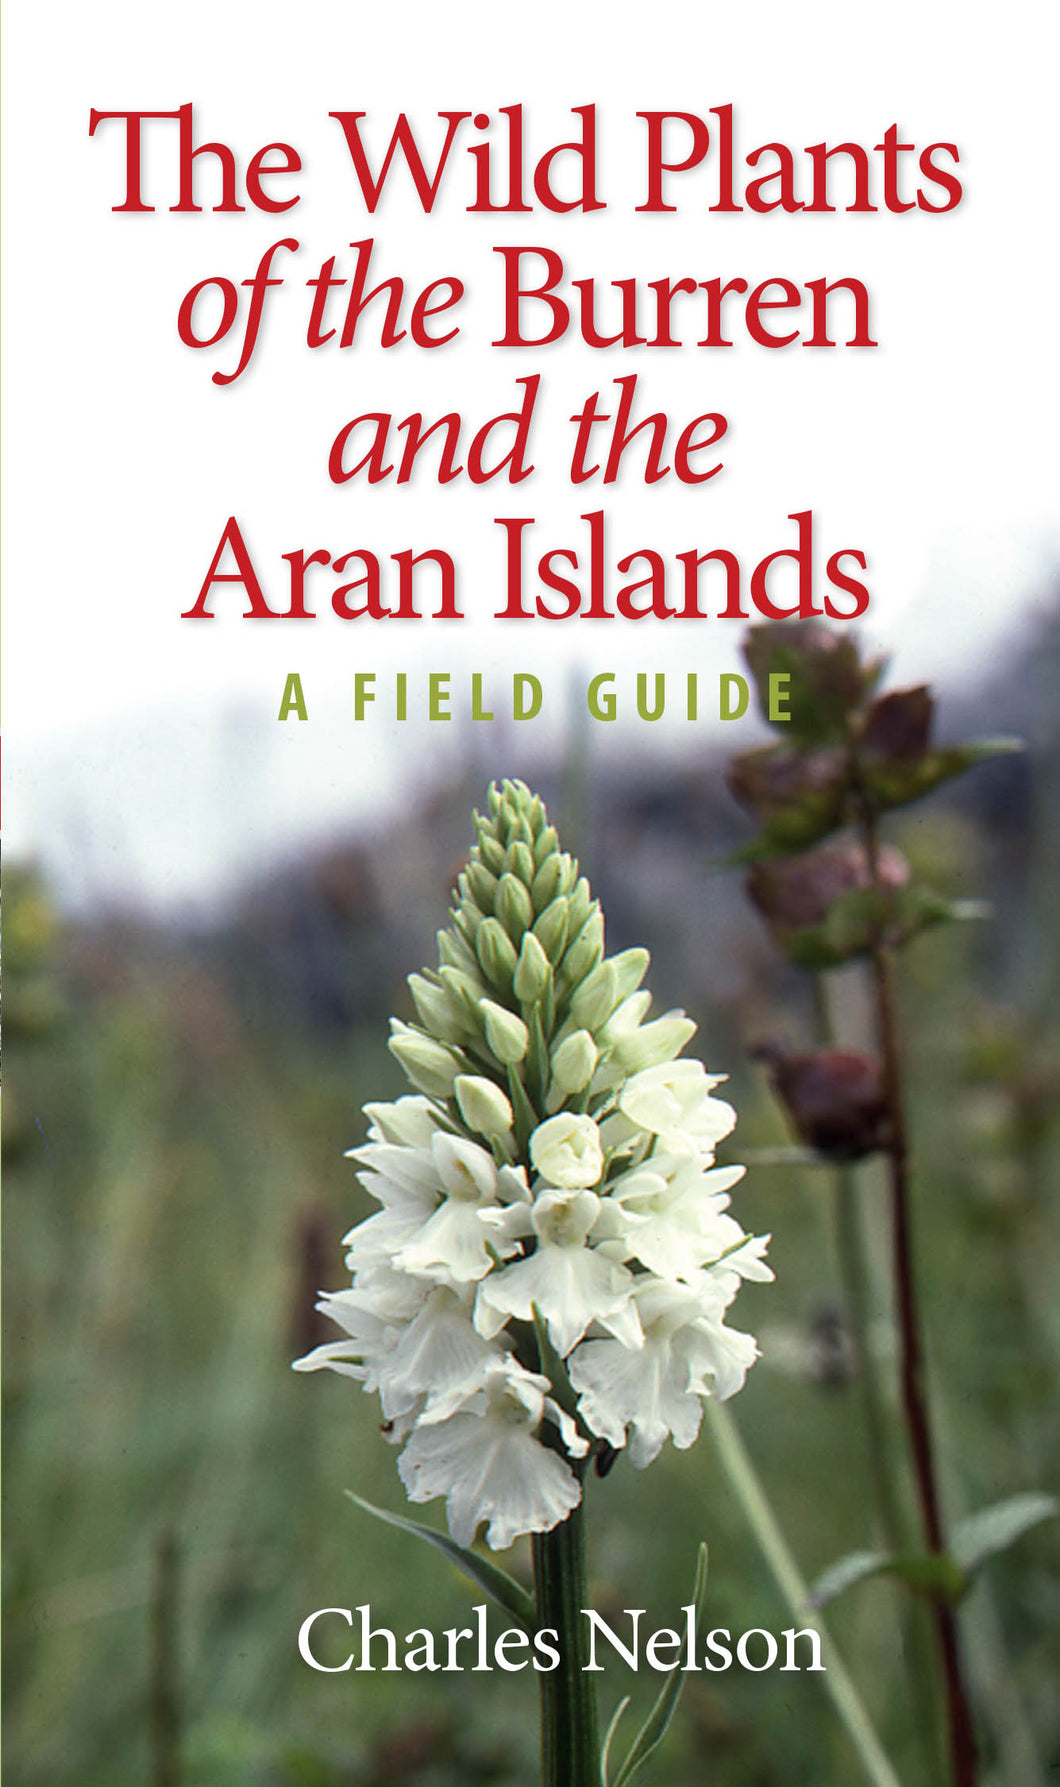 The Wild Plants of the Burren and the Aran Islands: A Field Guide